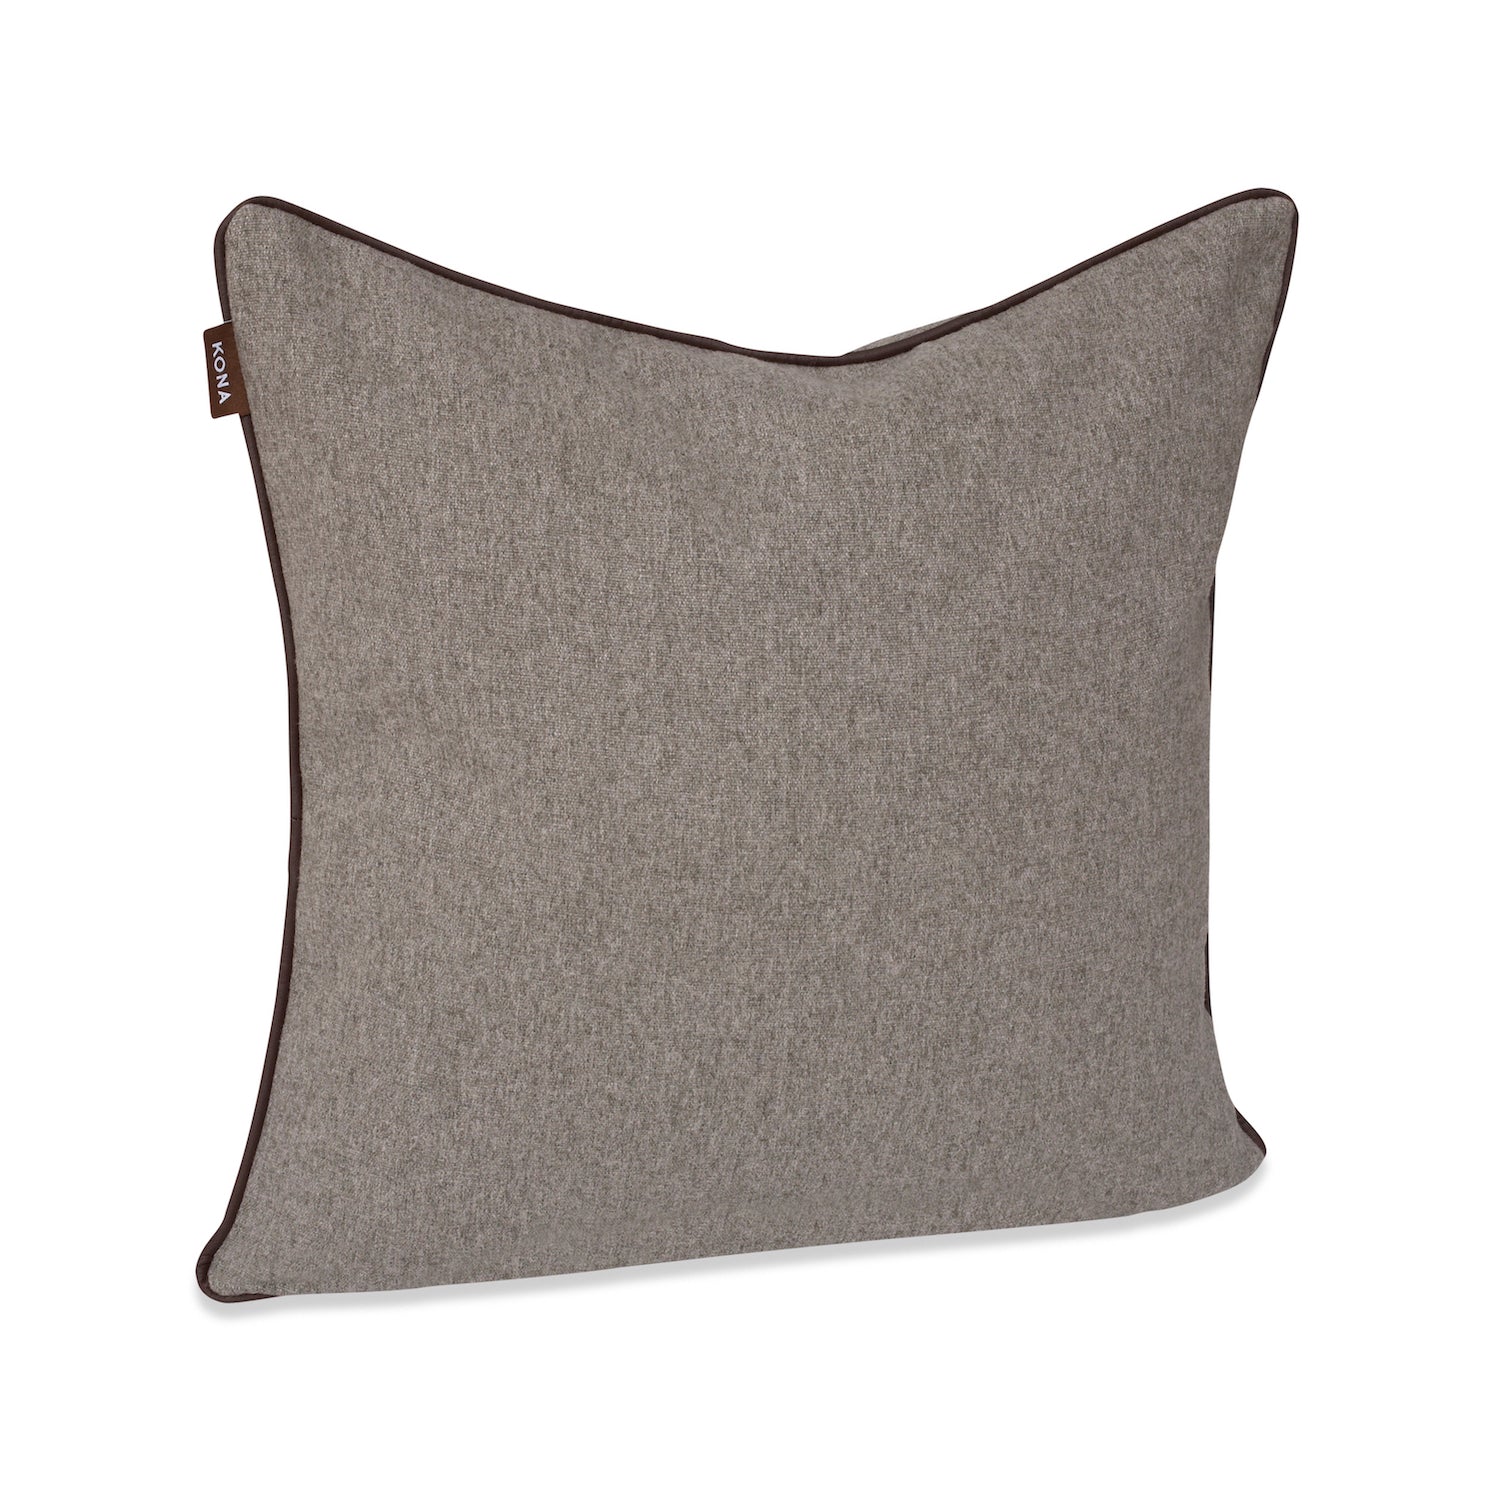 KONA CAVE® Grey flannel pillow cover with brown vegan-leather trim. Luxury flannel pillow cover. 